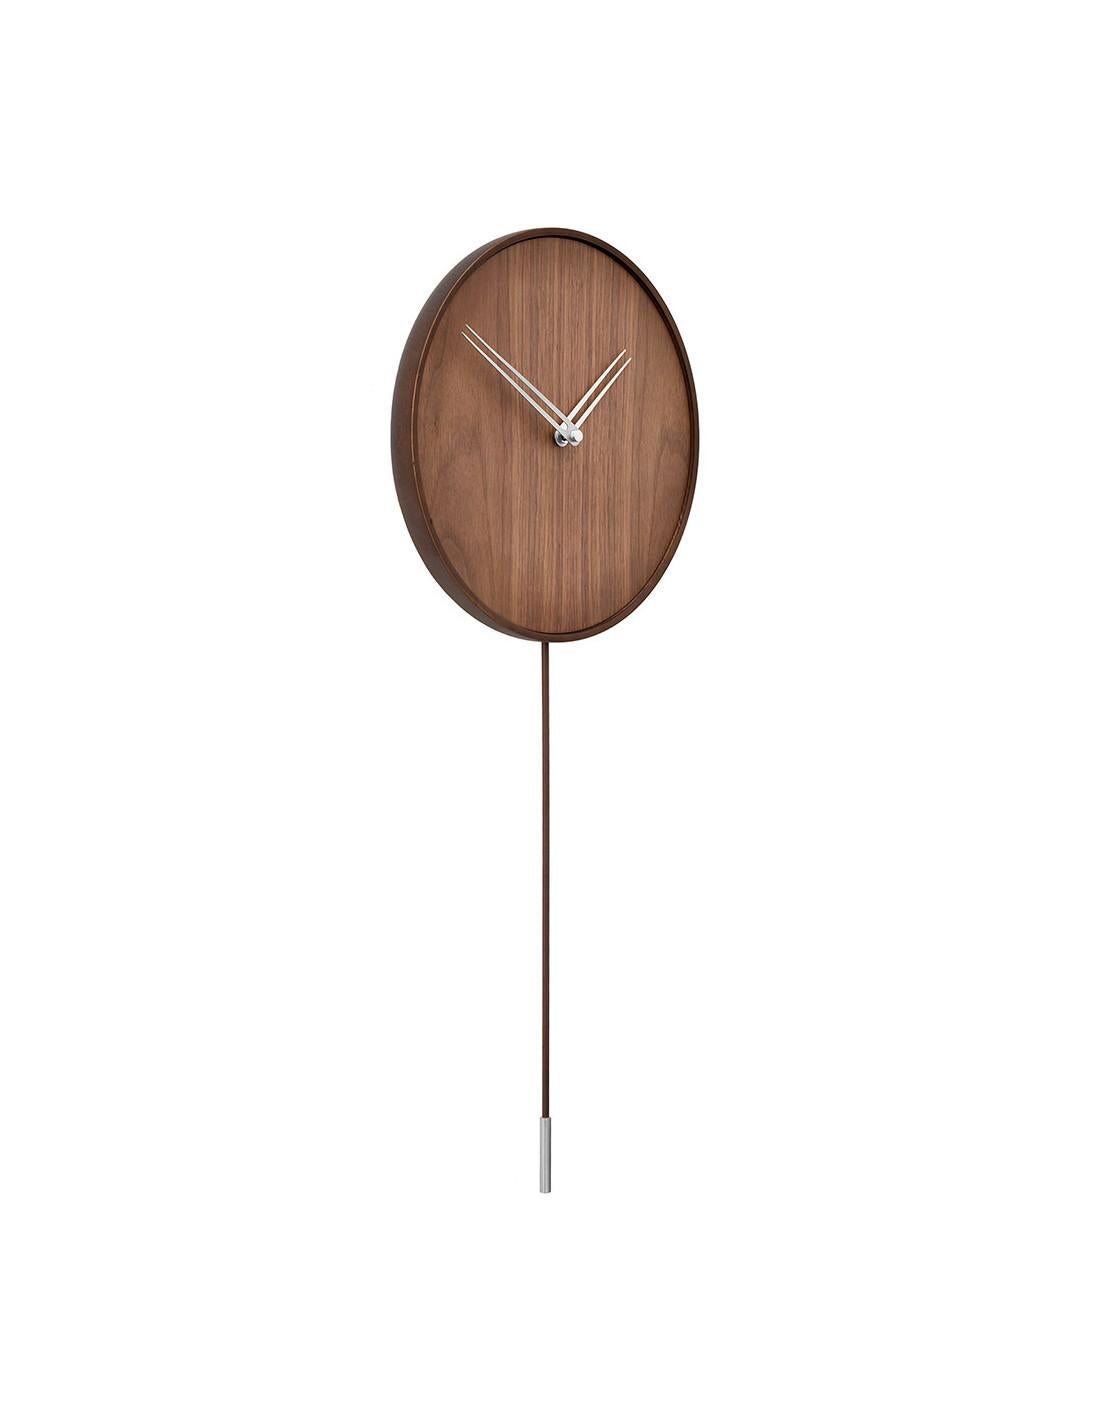 The Swing I clock will allow you to maintain an interior design that stands out for incorporating a delicate and simplistic soft touch no matter what room you are in. The comfort of this clocks design will go hand in hand with the simple and